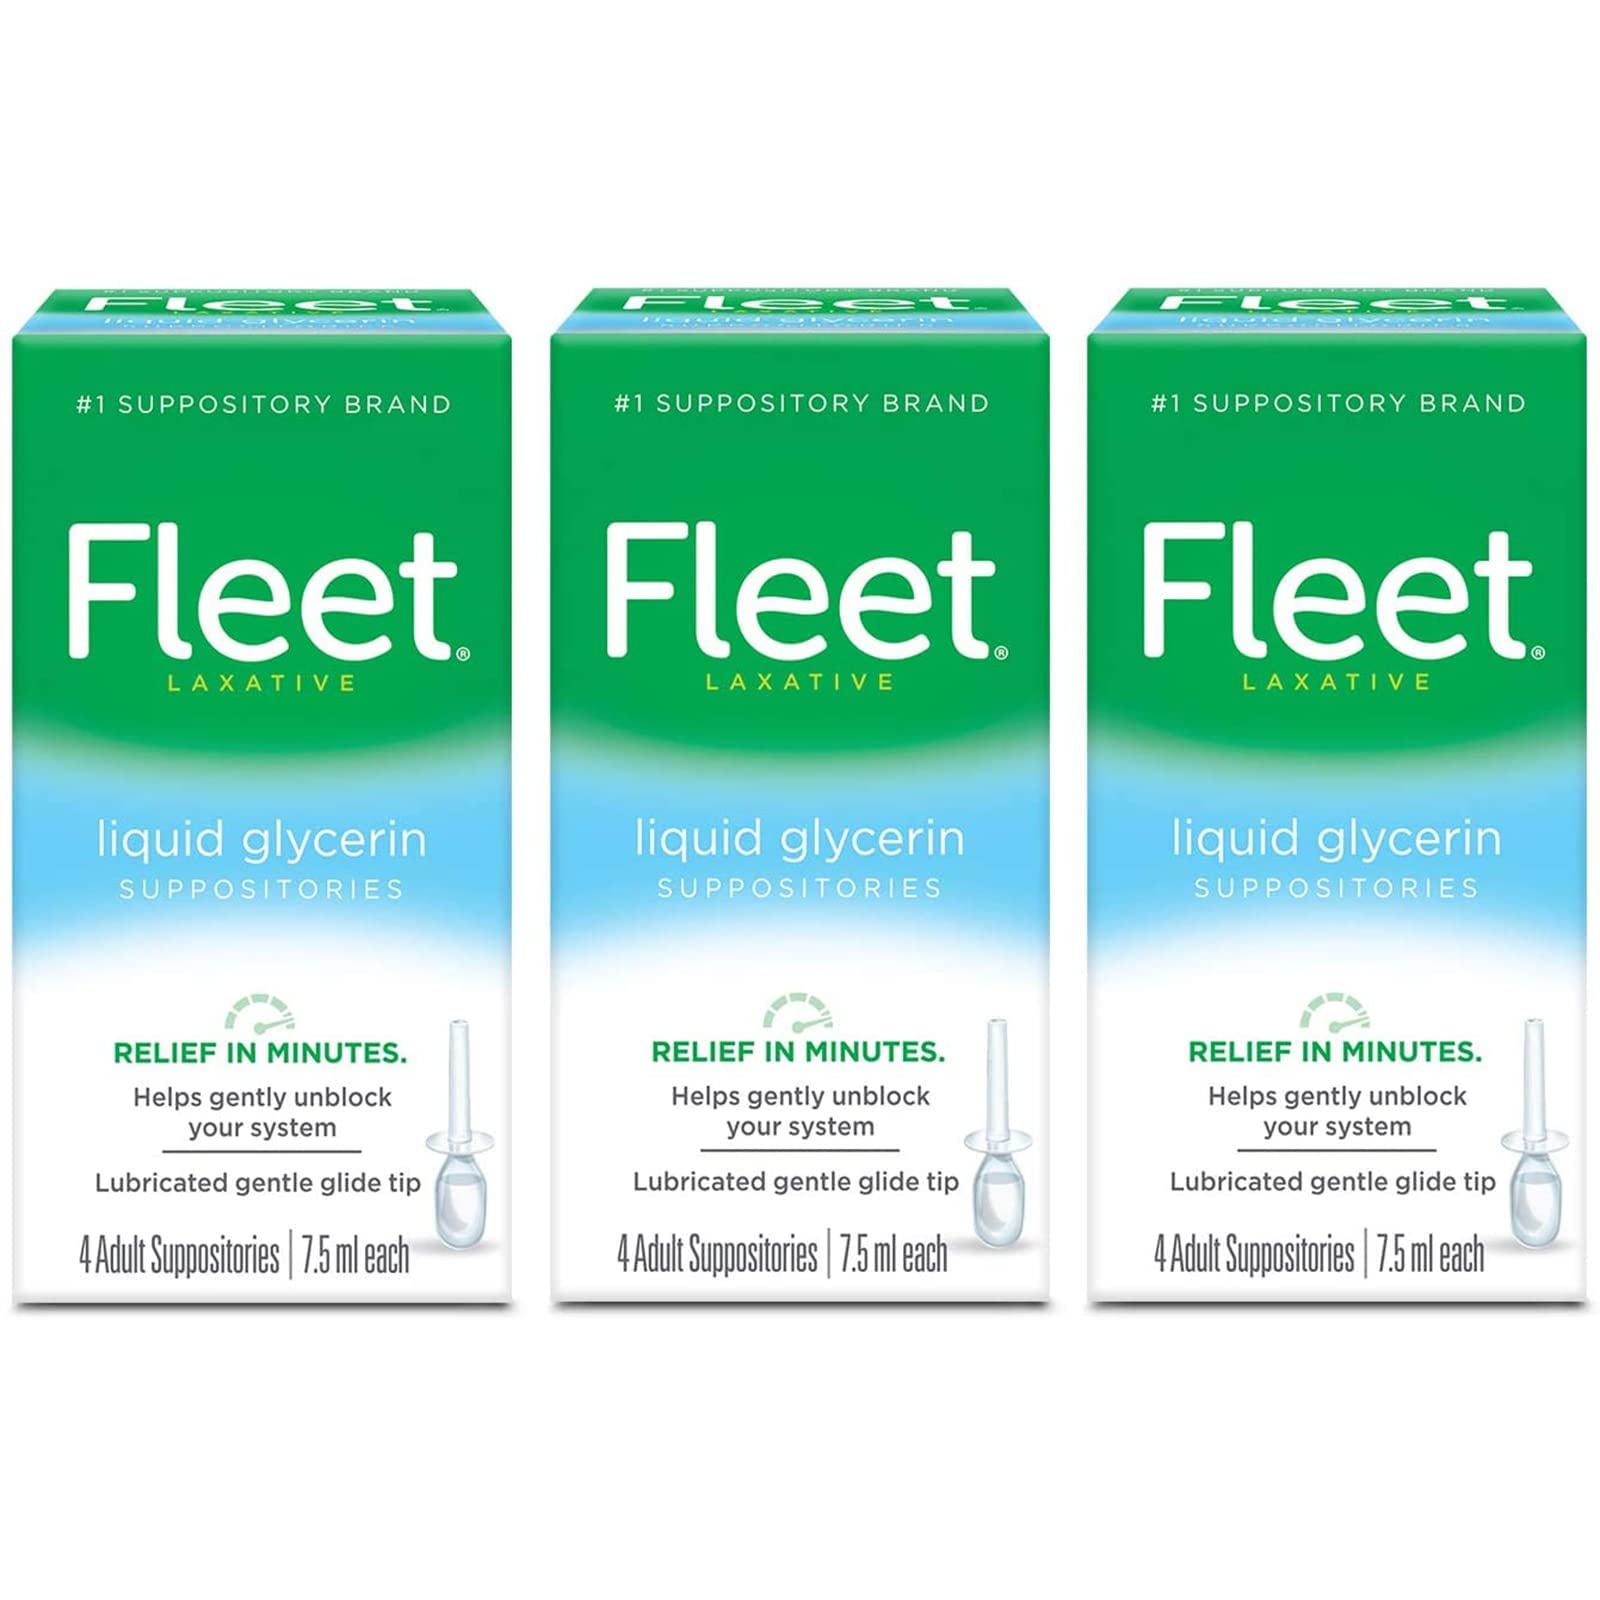 Fleet Laxative Glycerin Suppositories for Adult Constipation, 50